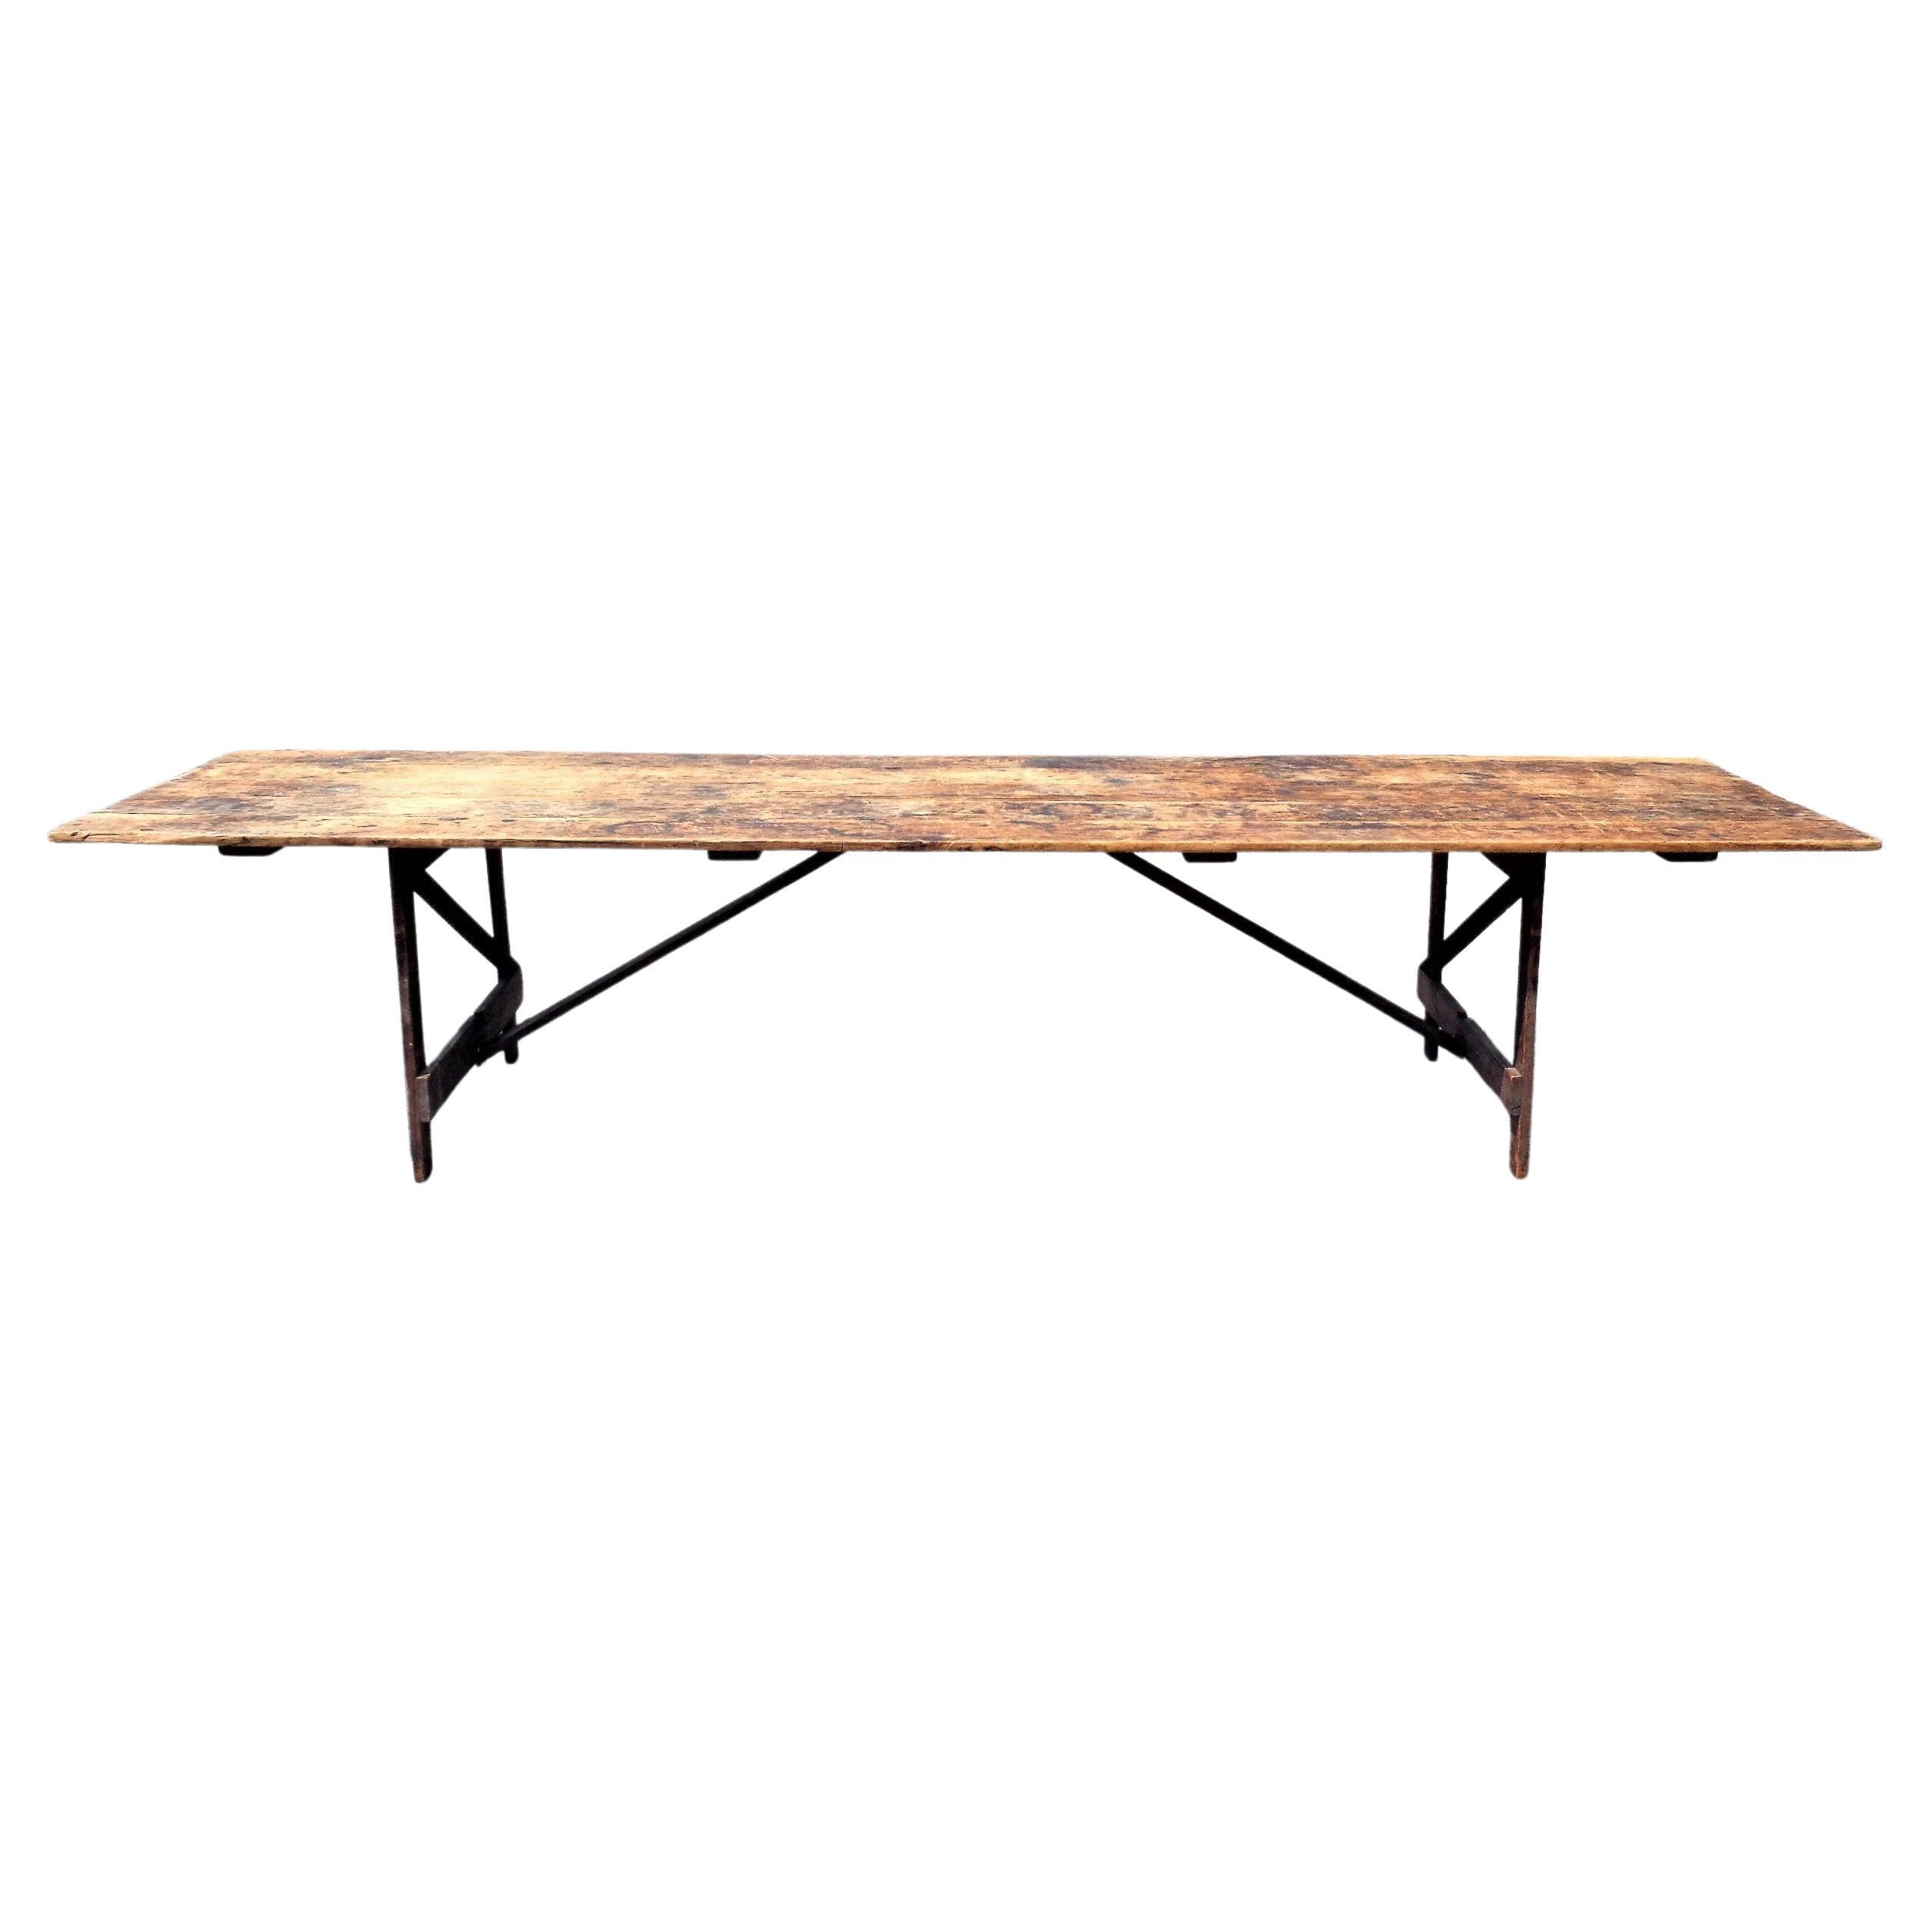 Hand-Crafted Antique American Eleven Foot Long Folding Farm Table For Sale